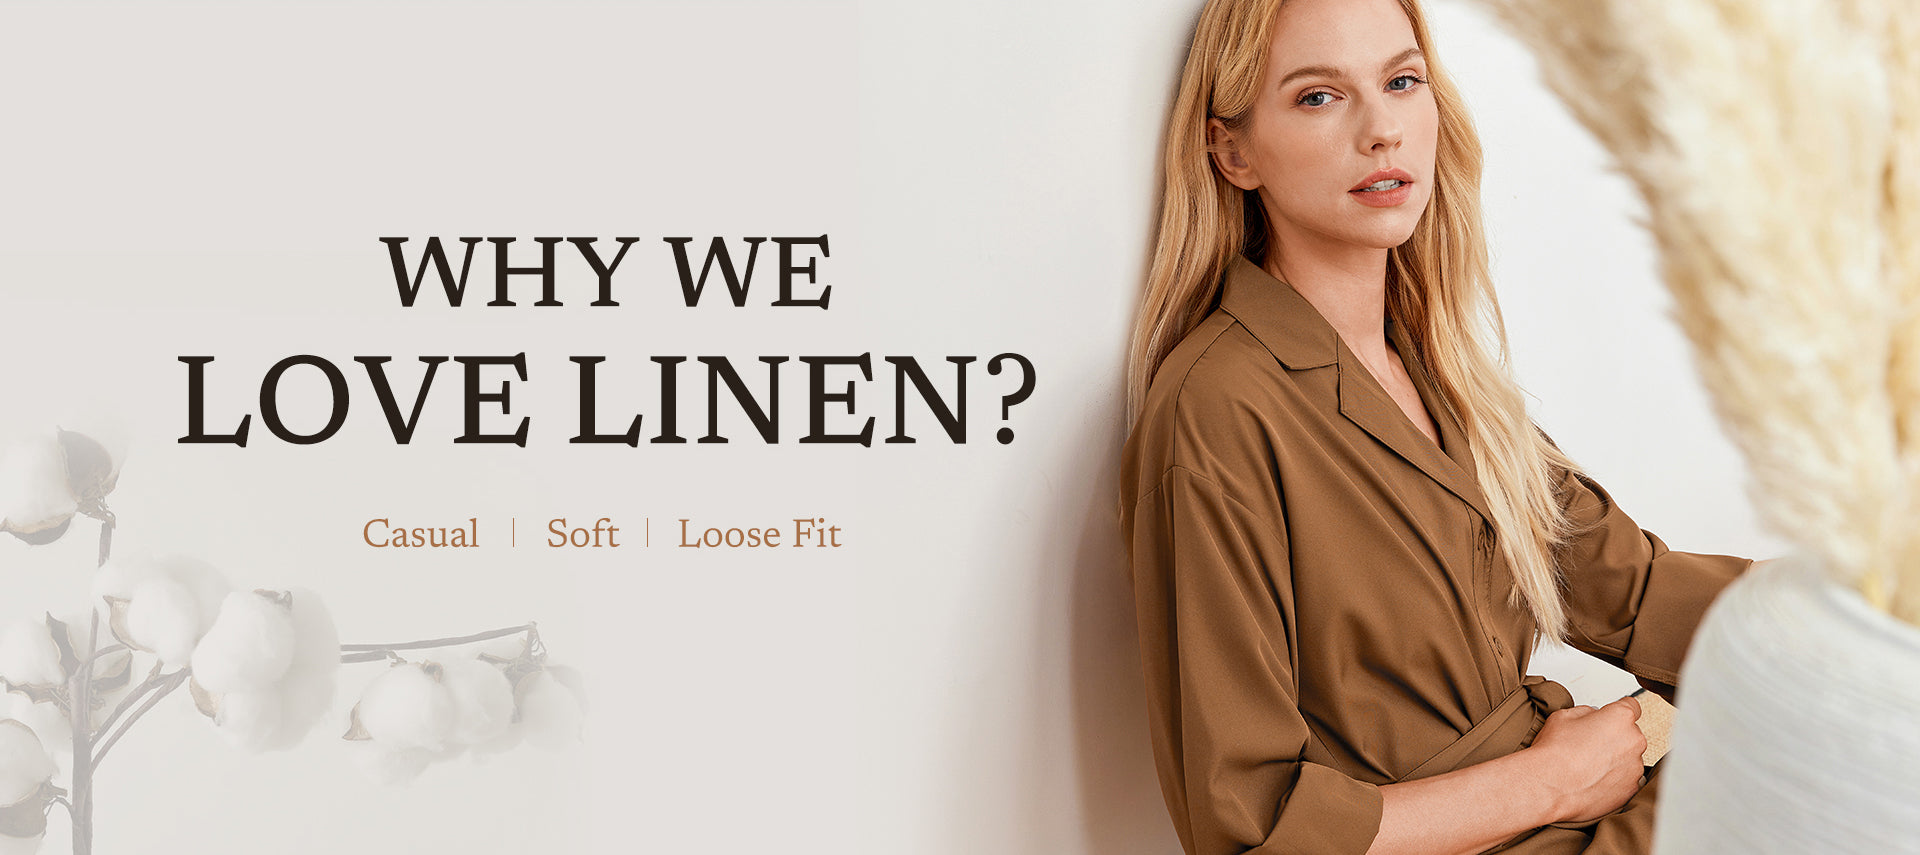 WHY WE LOVE LINEN?